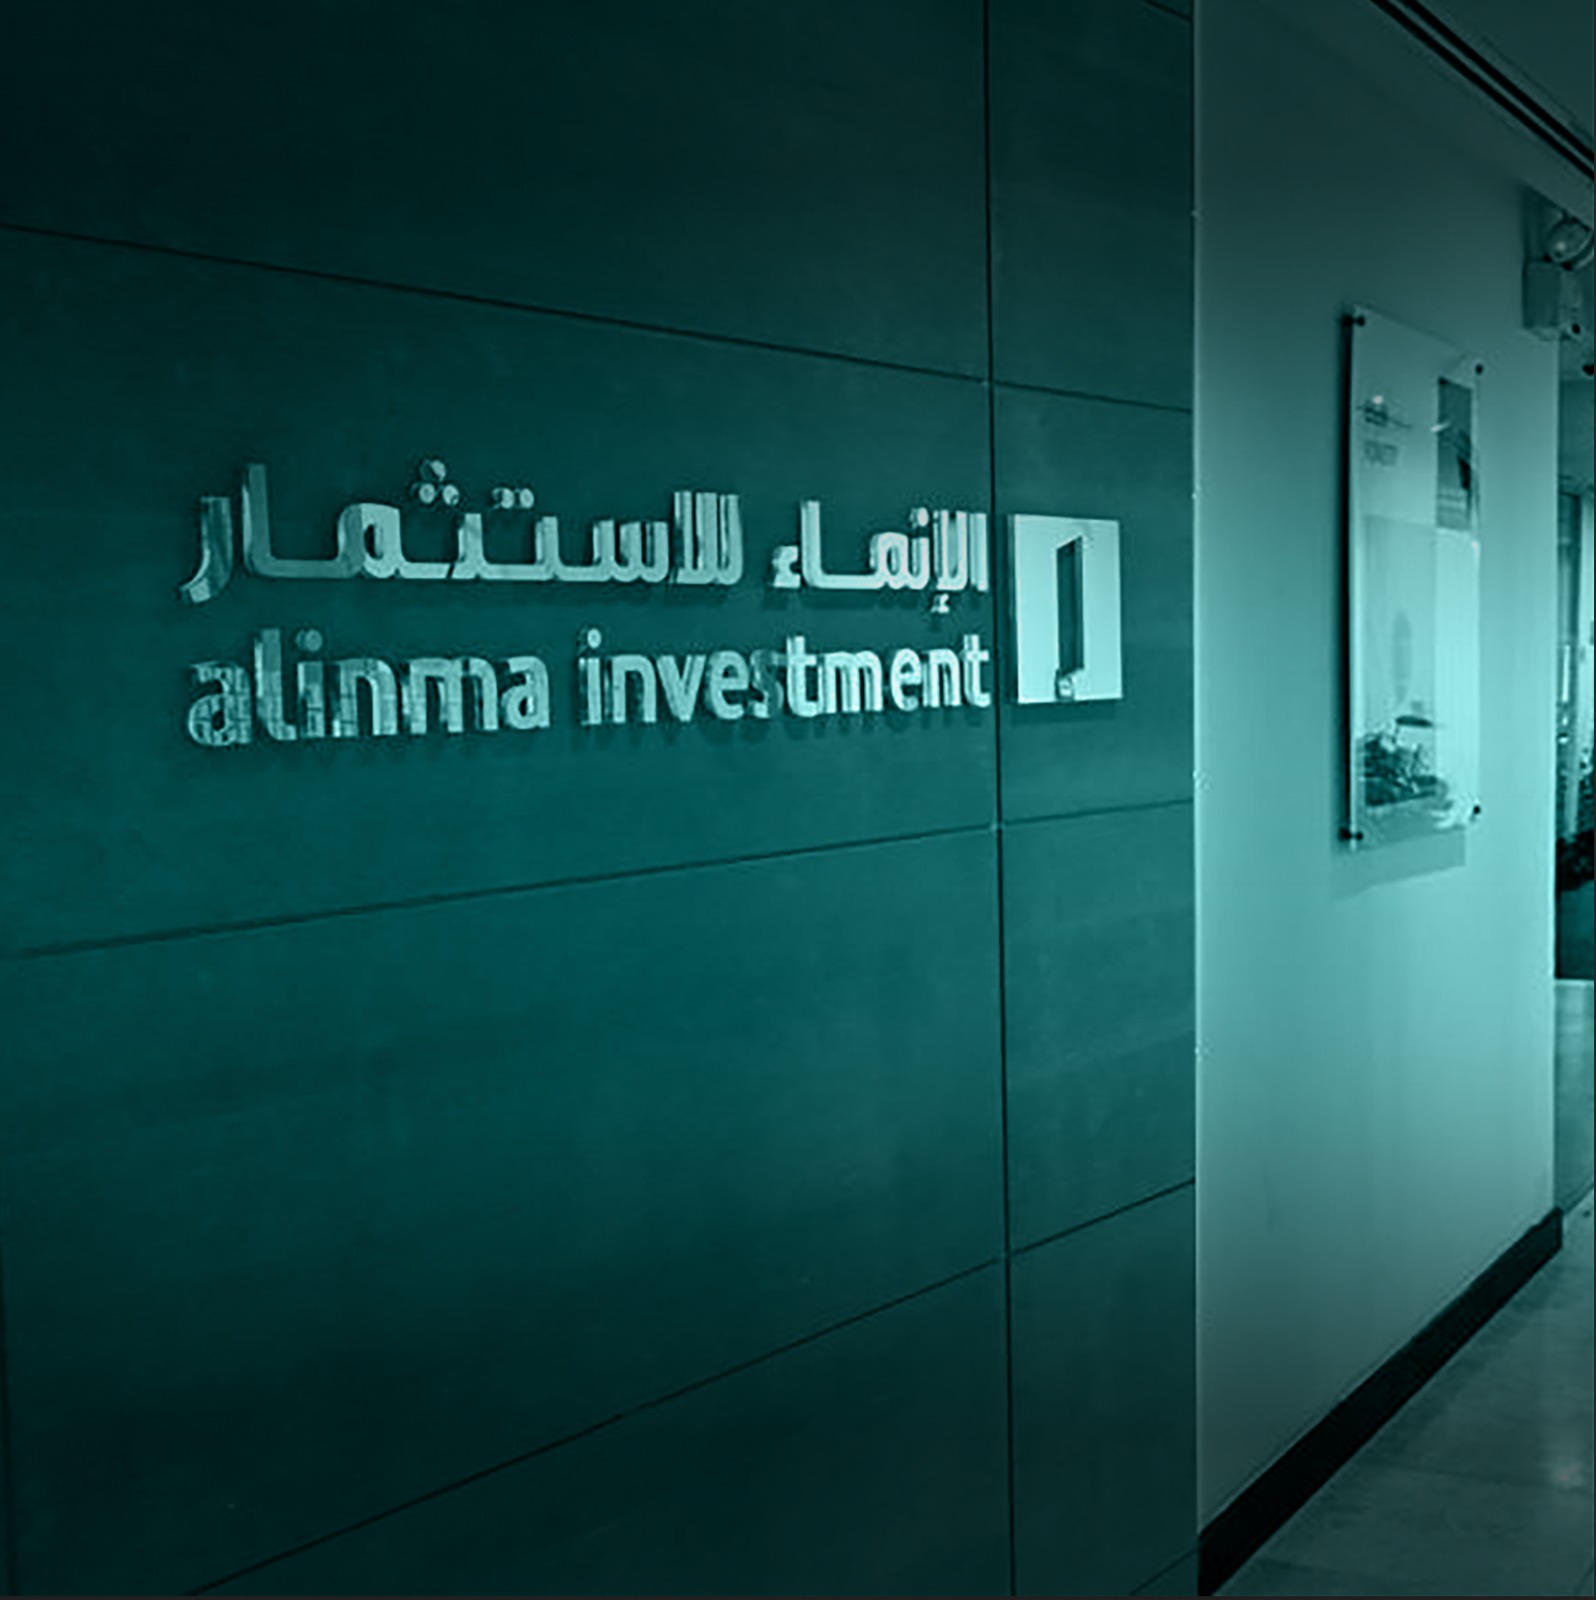 Alinma Investment Company announces the Offering of  Yaqeen Capital Company shares for subscription and listing in the parallel market (“Nomu”) and the determination of the offering price.